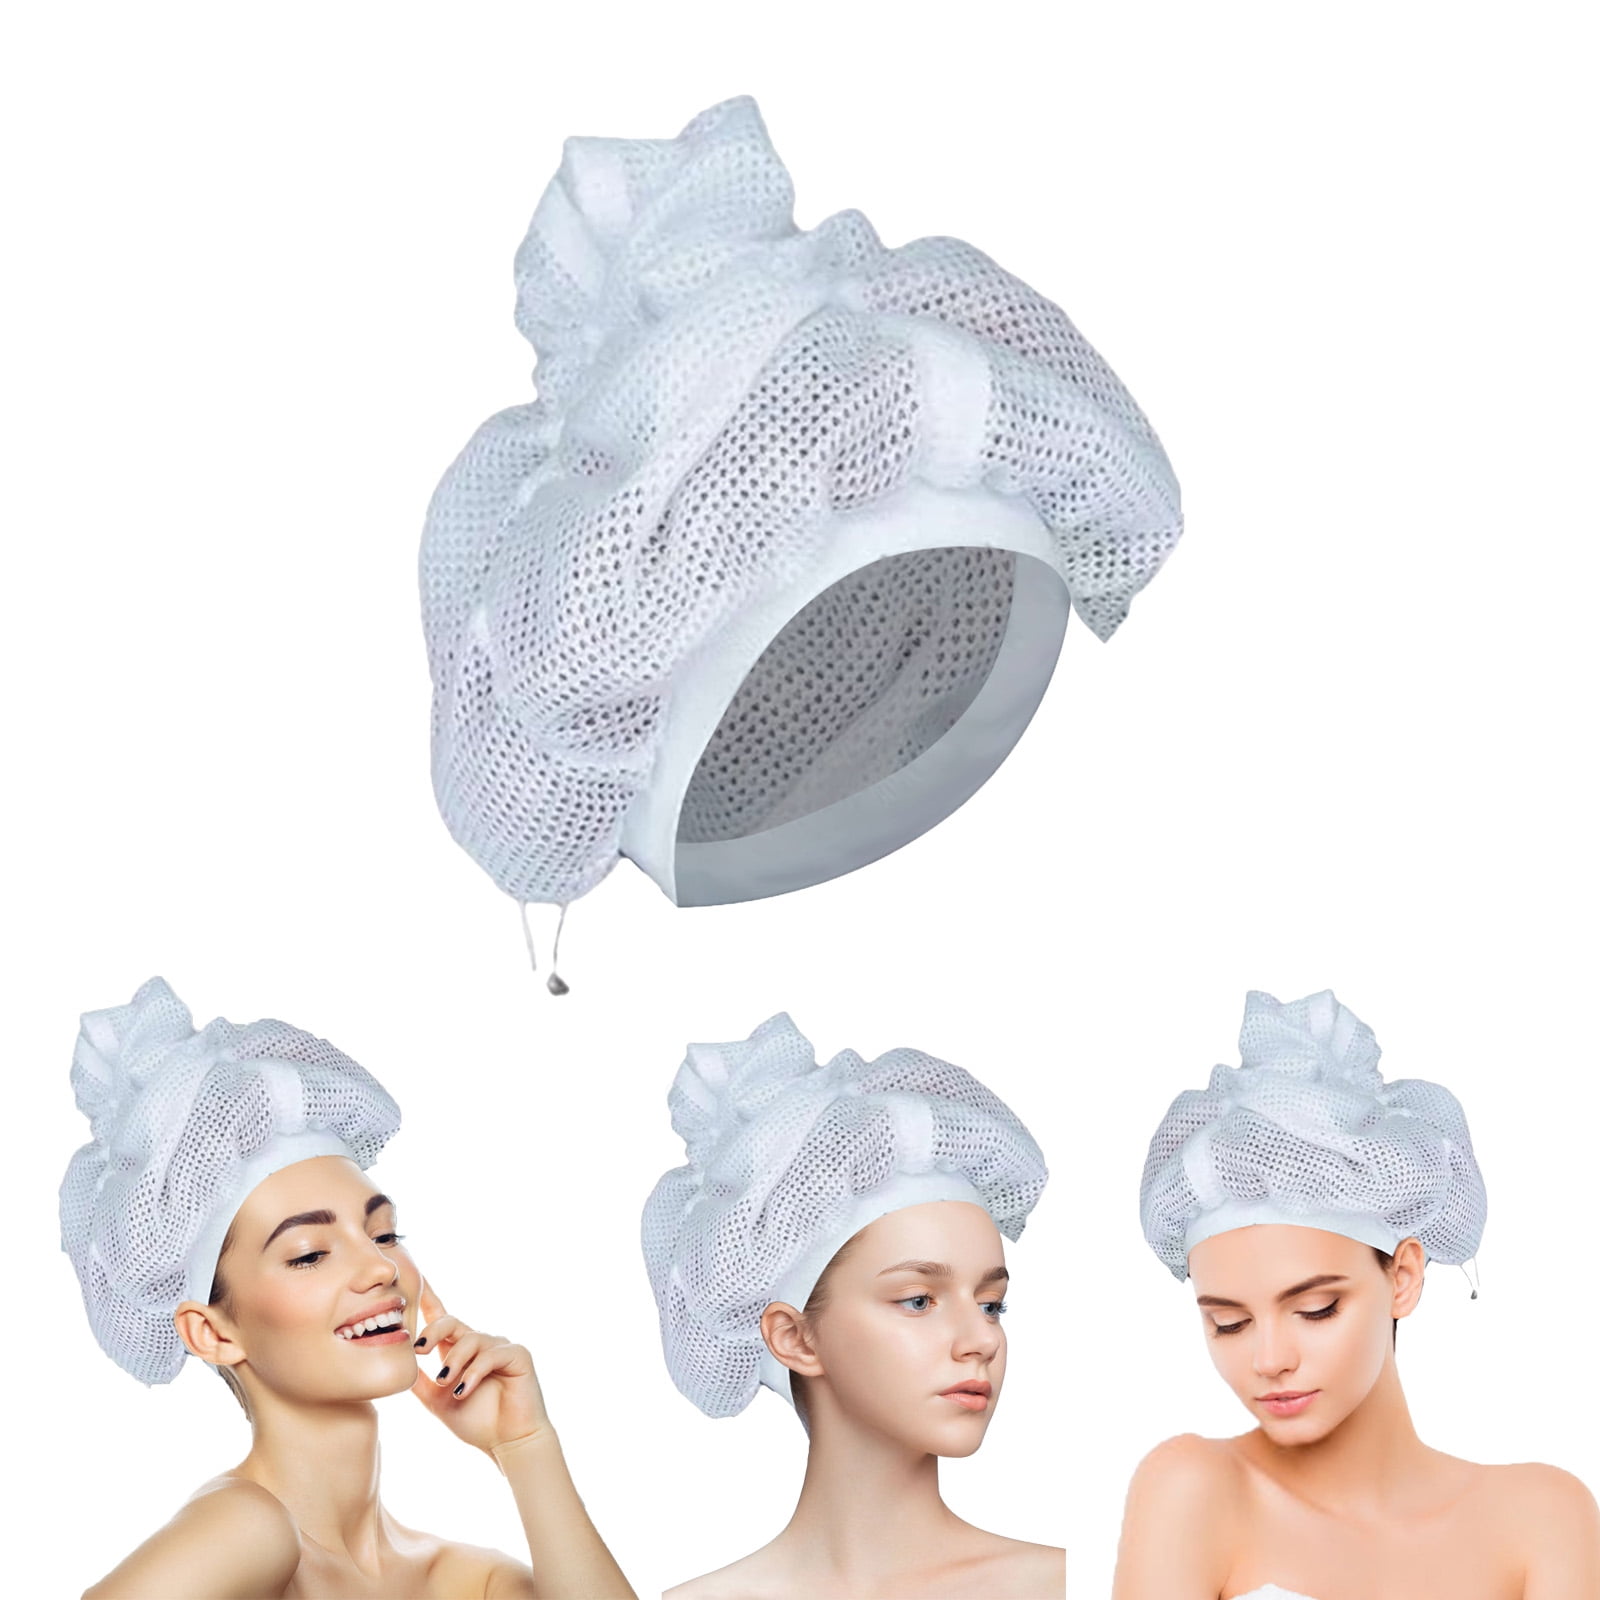  THRLIP Net Plopping Cap for Drying Curly Hair, Soft Bonnet Hair  Dryer Portable Attachment, Net Plopping Cap for Drying Curly Hair, Net  Plopping Cap (Color : 3pcs) : Beauty & Personal